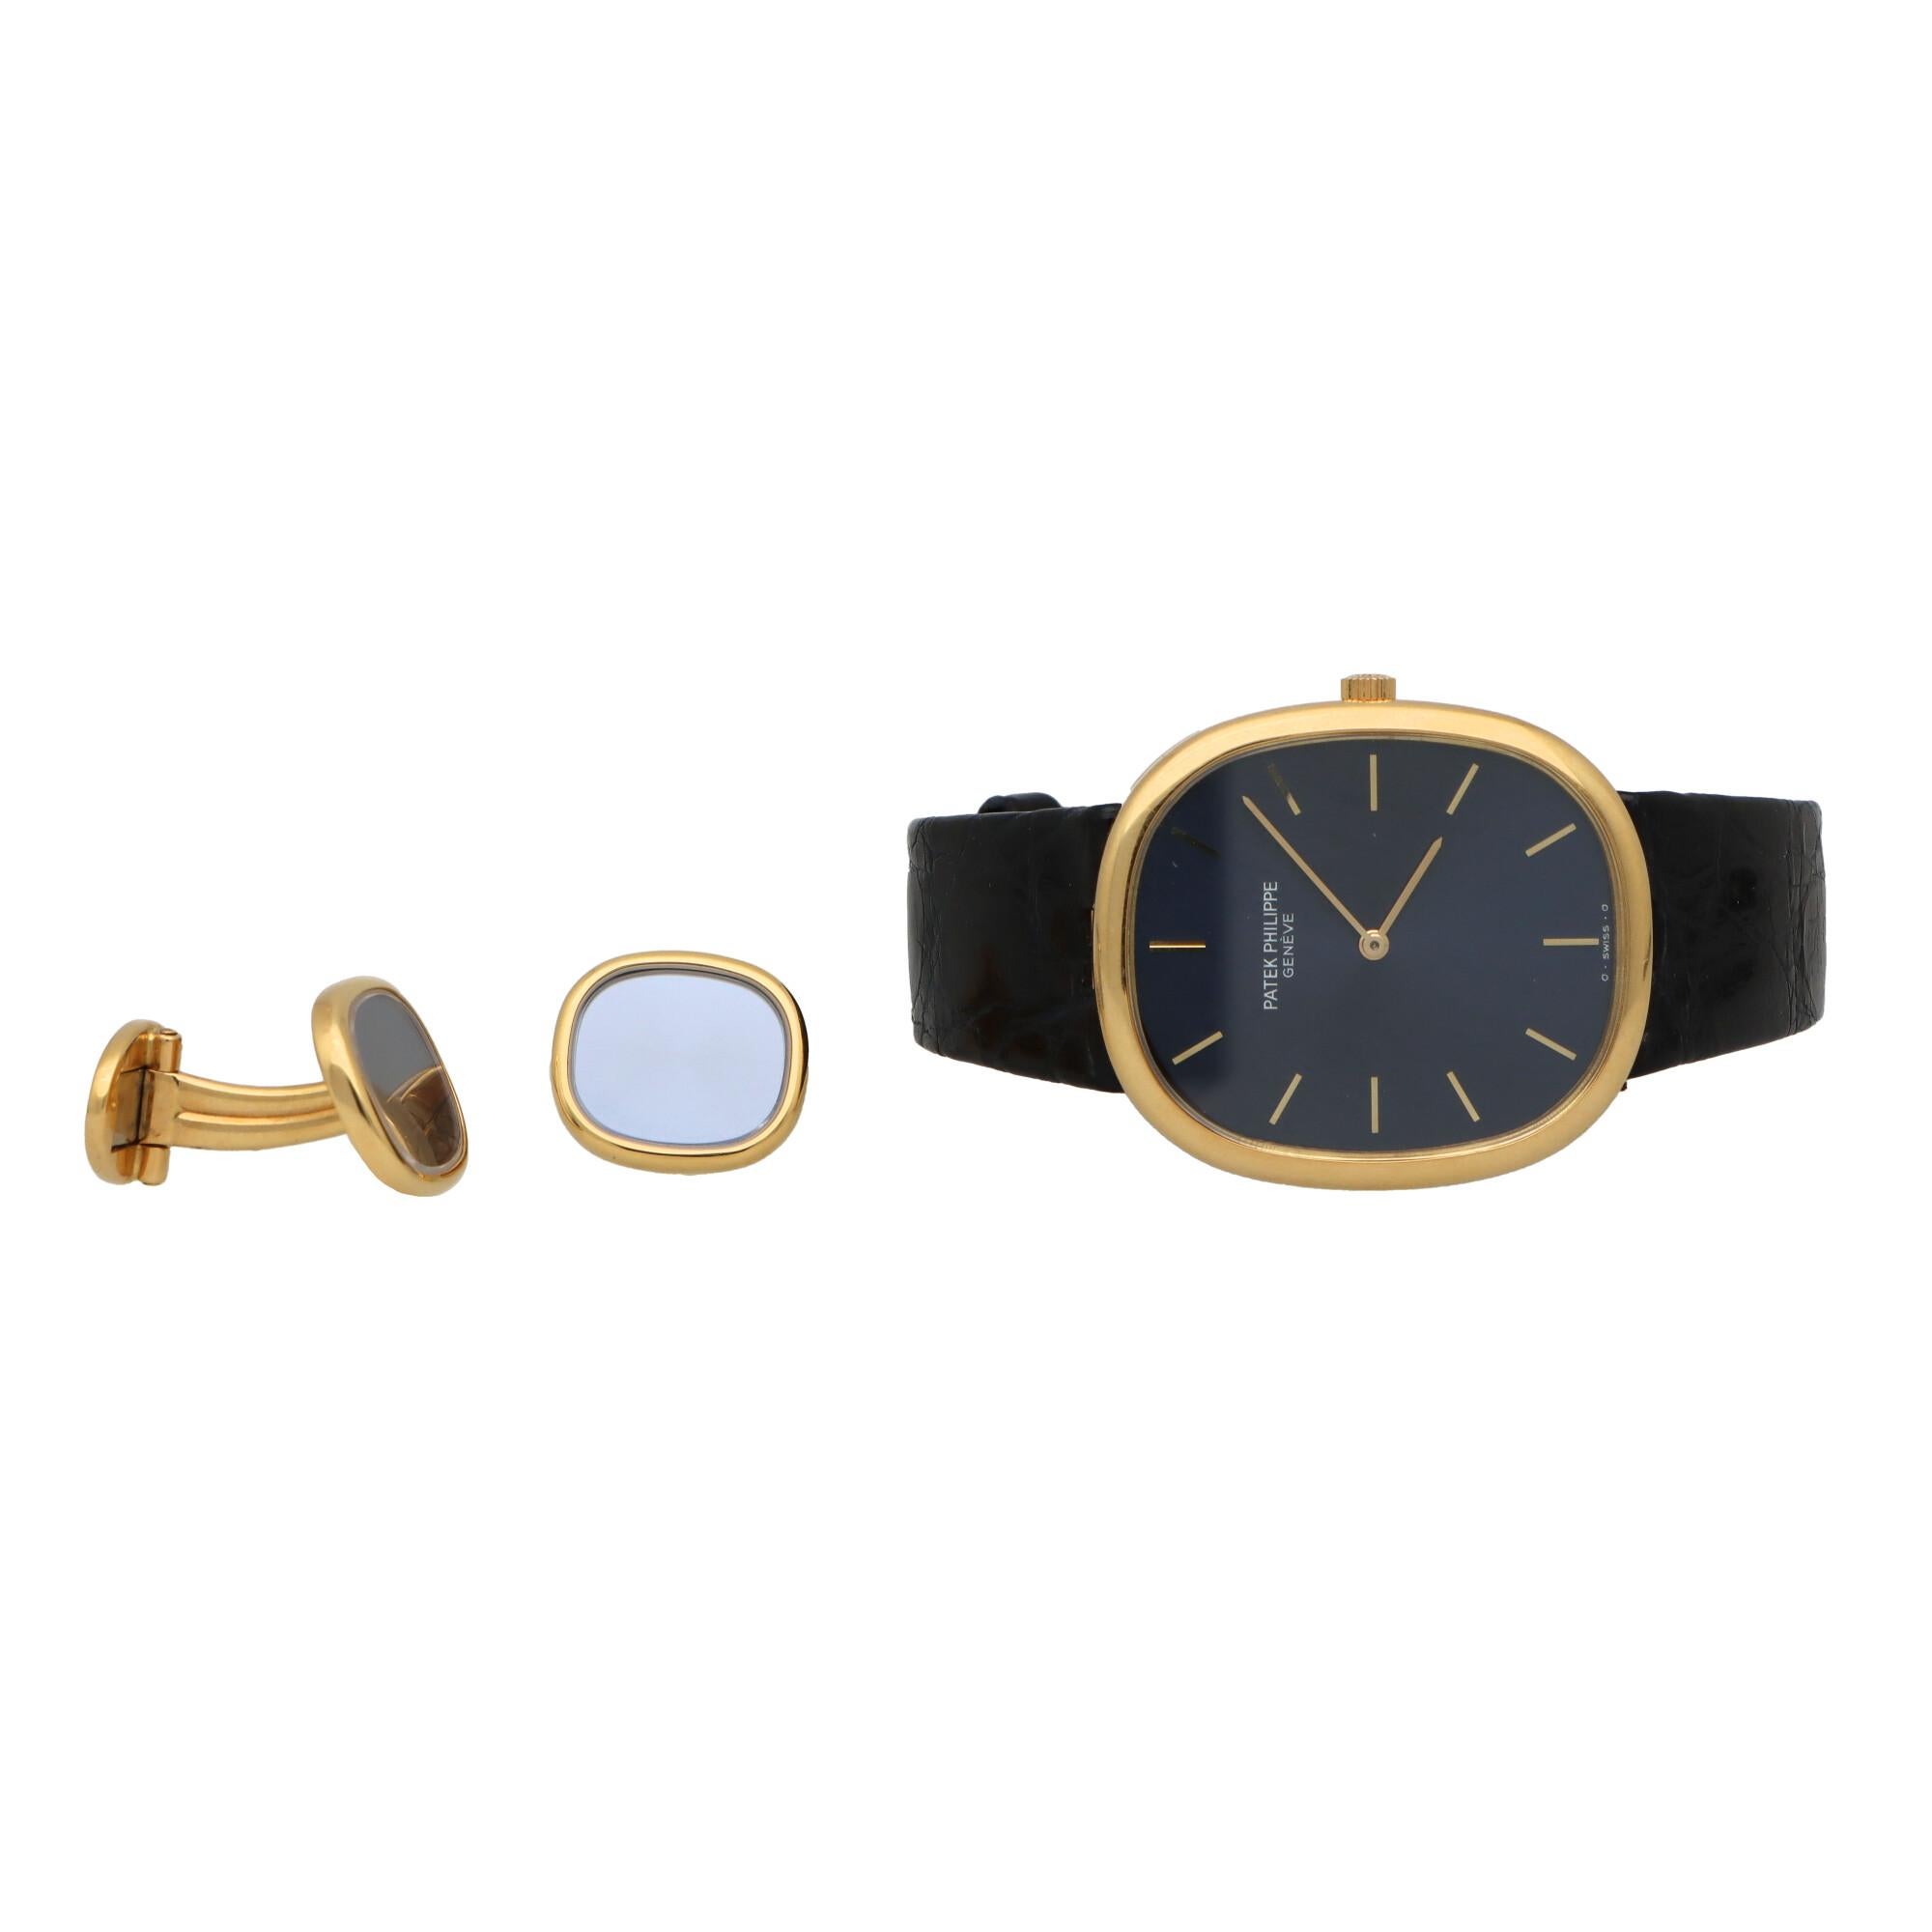 A stylist vintage Patek Philippe ‘Ellipse’ wristwatch set in 18k yellow gold. Watch model ref 3838, circa 1985.

The watch has a 31-millimetre case with a beautiful blue sunburst dial and gold baton markers. Quartz movement E27 with sapphire glass.